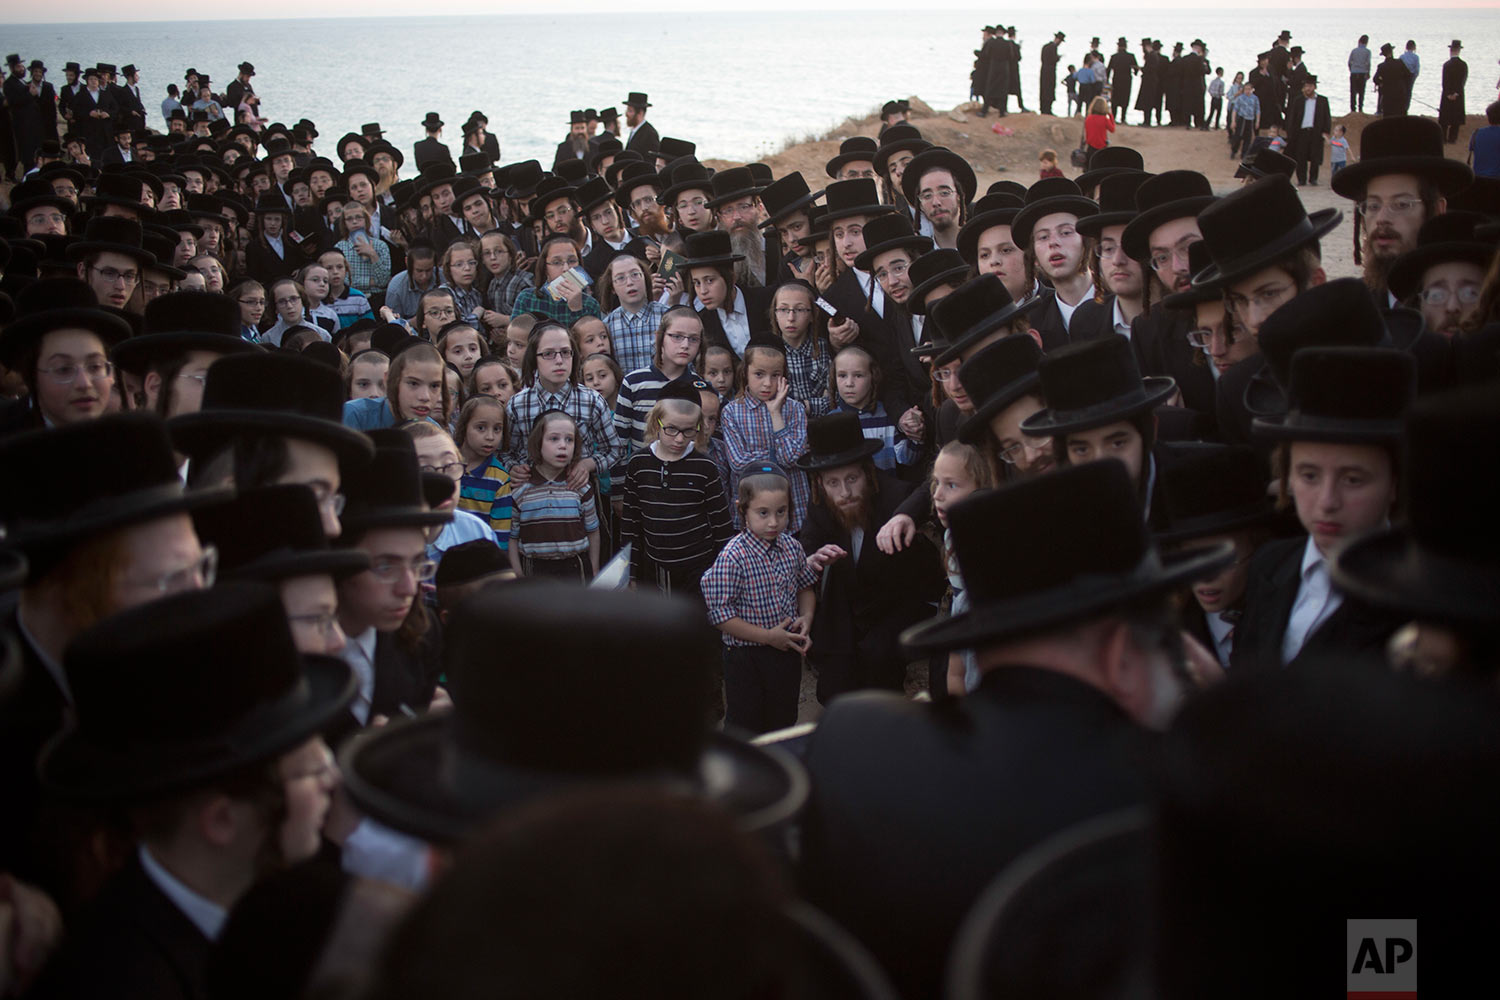  Ultra-Orthodox Jewish men of the Vizhnitz Hassidic sect listen to their rabbi on a hill overlooking the Mediterranean Sea as they participate in a Tashlich ceremony in Herzeliya, Israel, Thursday, Sept. 28, 2017. (AP Photo/Ariel Schalit) 